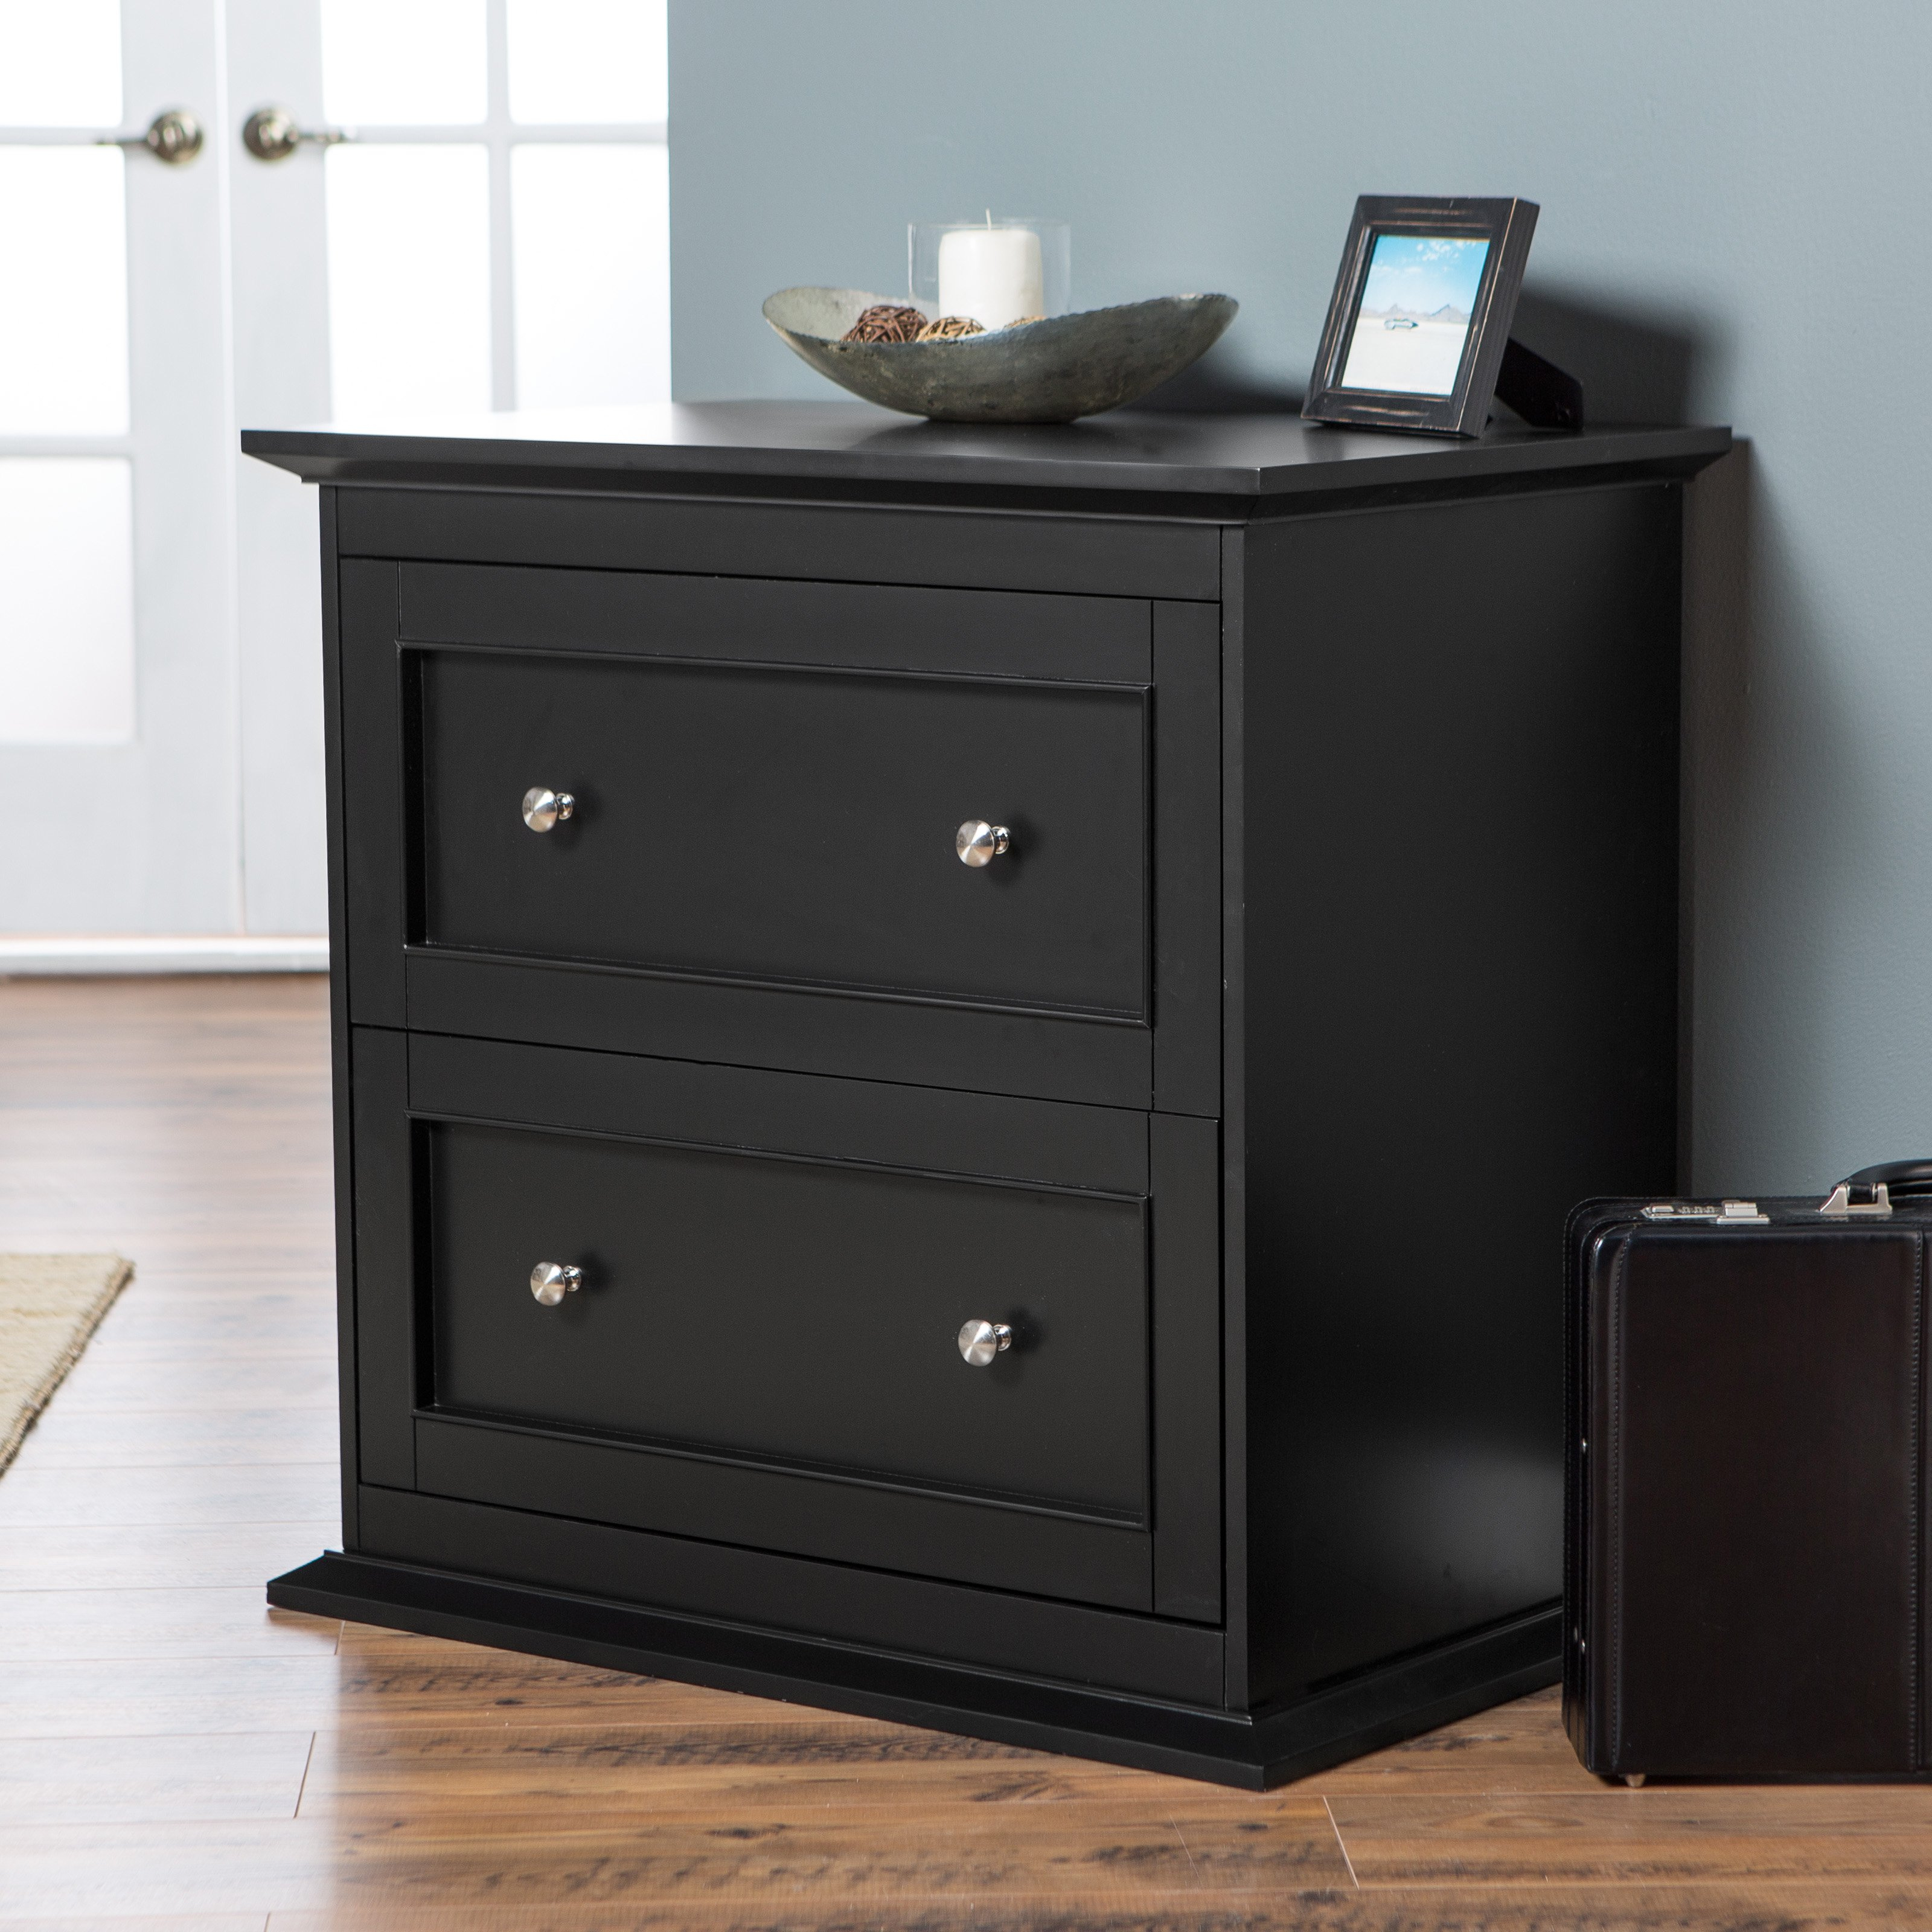 Belham Living Hampton 2 Drawer Lateral Wood Filing Cabinet Black intended for proportions 3200 X 3200